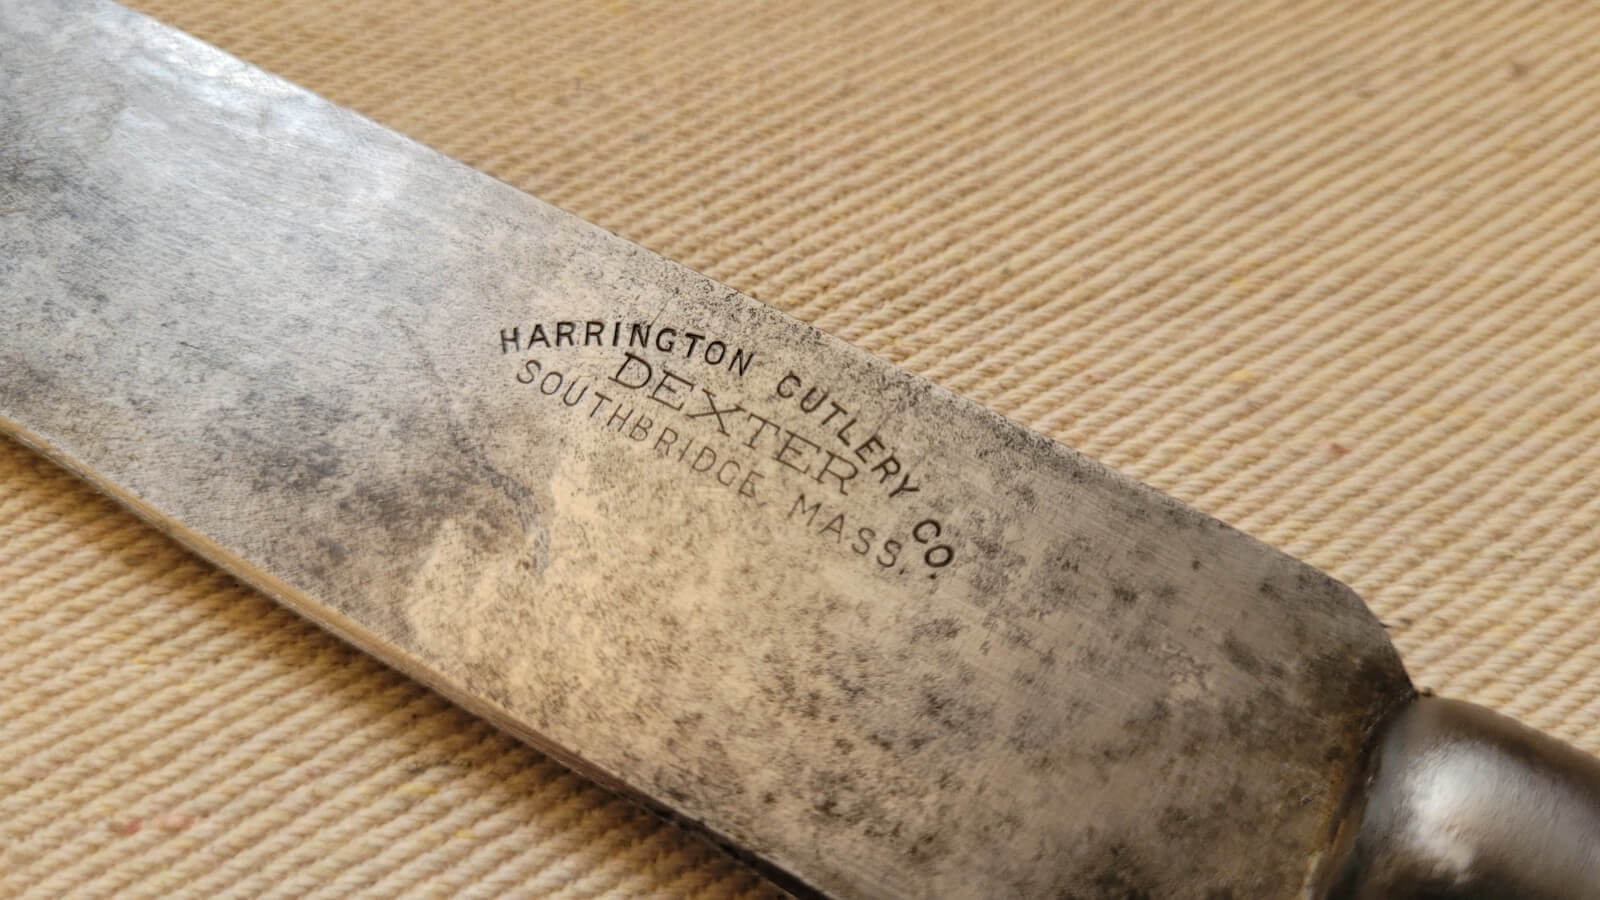 Antique Harrington Cutlery Co Dexter Knife Southbridge Mass - Vintage made in USA Cutlery and Knives Collectibles